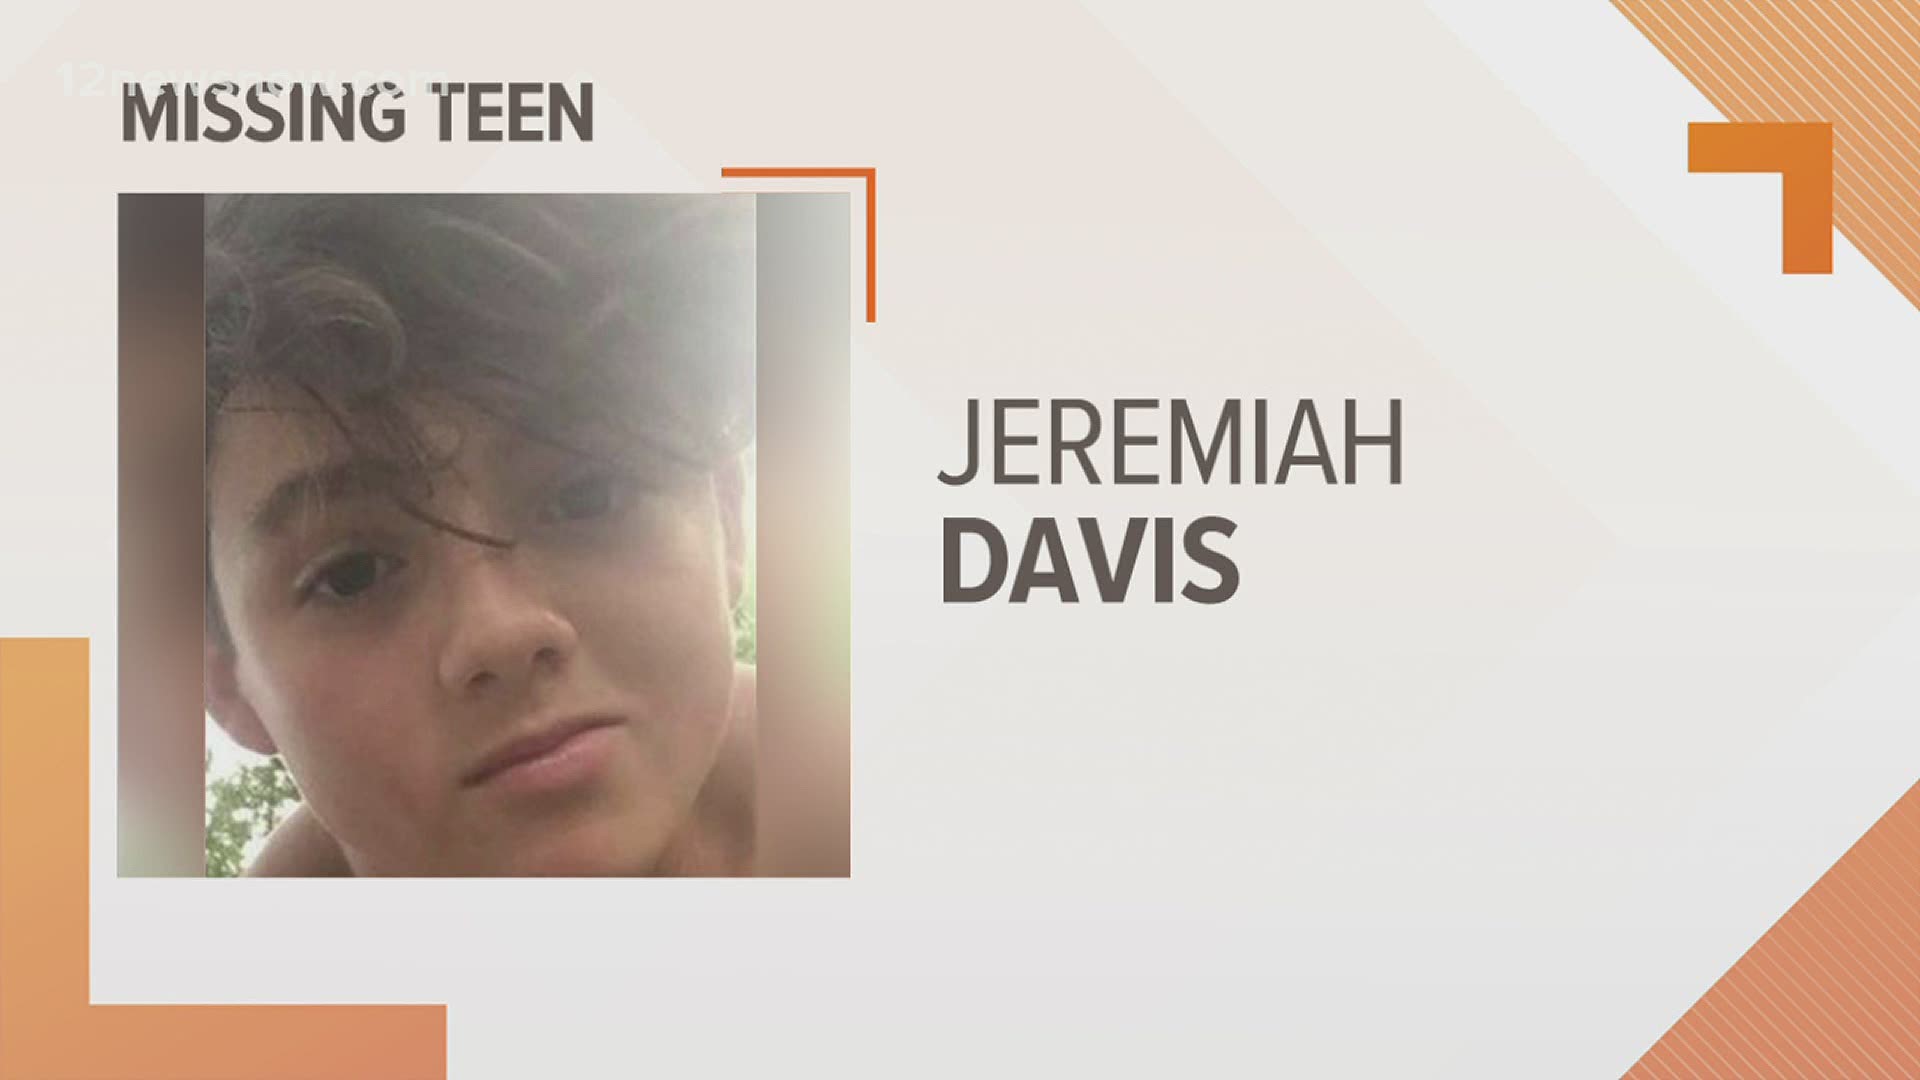 The missing Harris County teen, Jeremiah Davis, could be in our area. Call 911 if you have any information. For more COVID coverage, visit 12Newsnow.com/coronavirus.